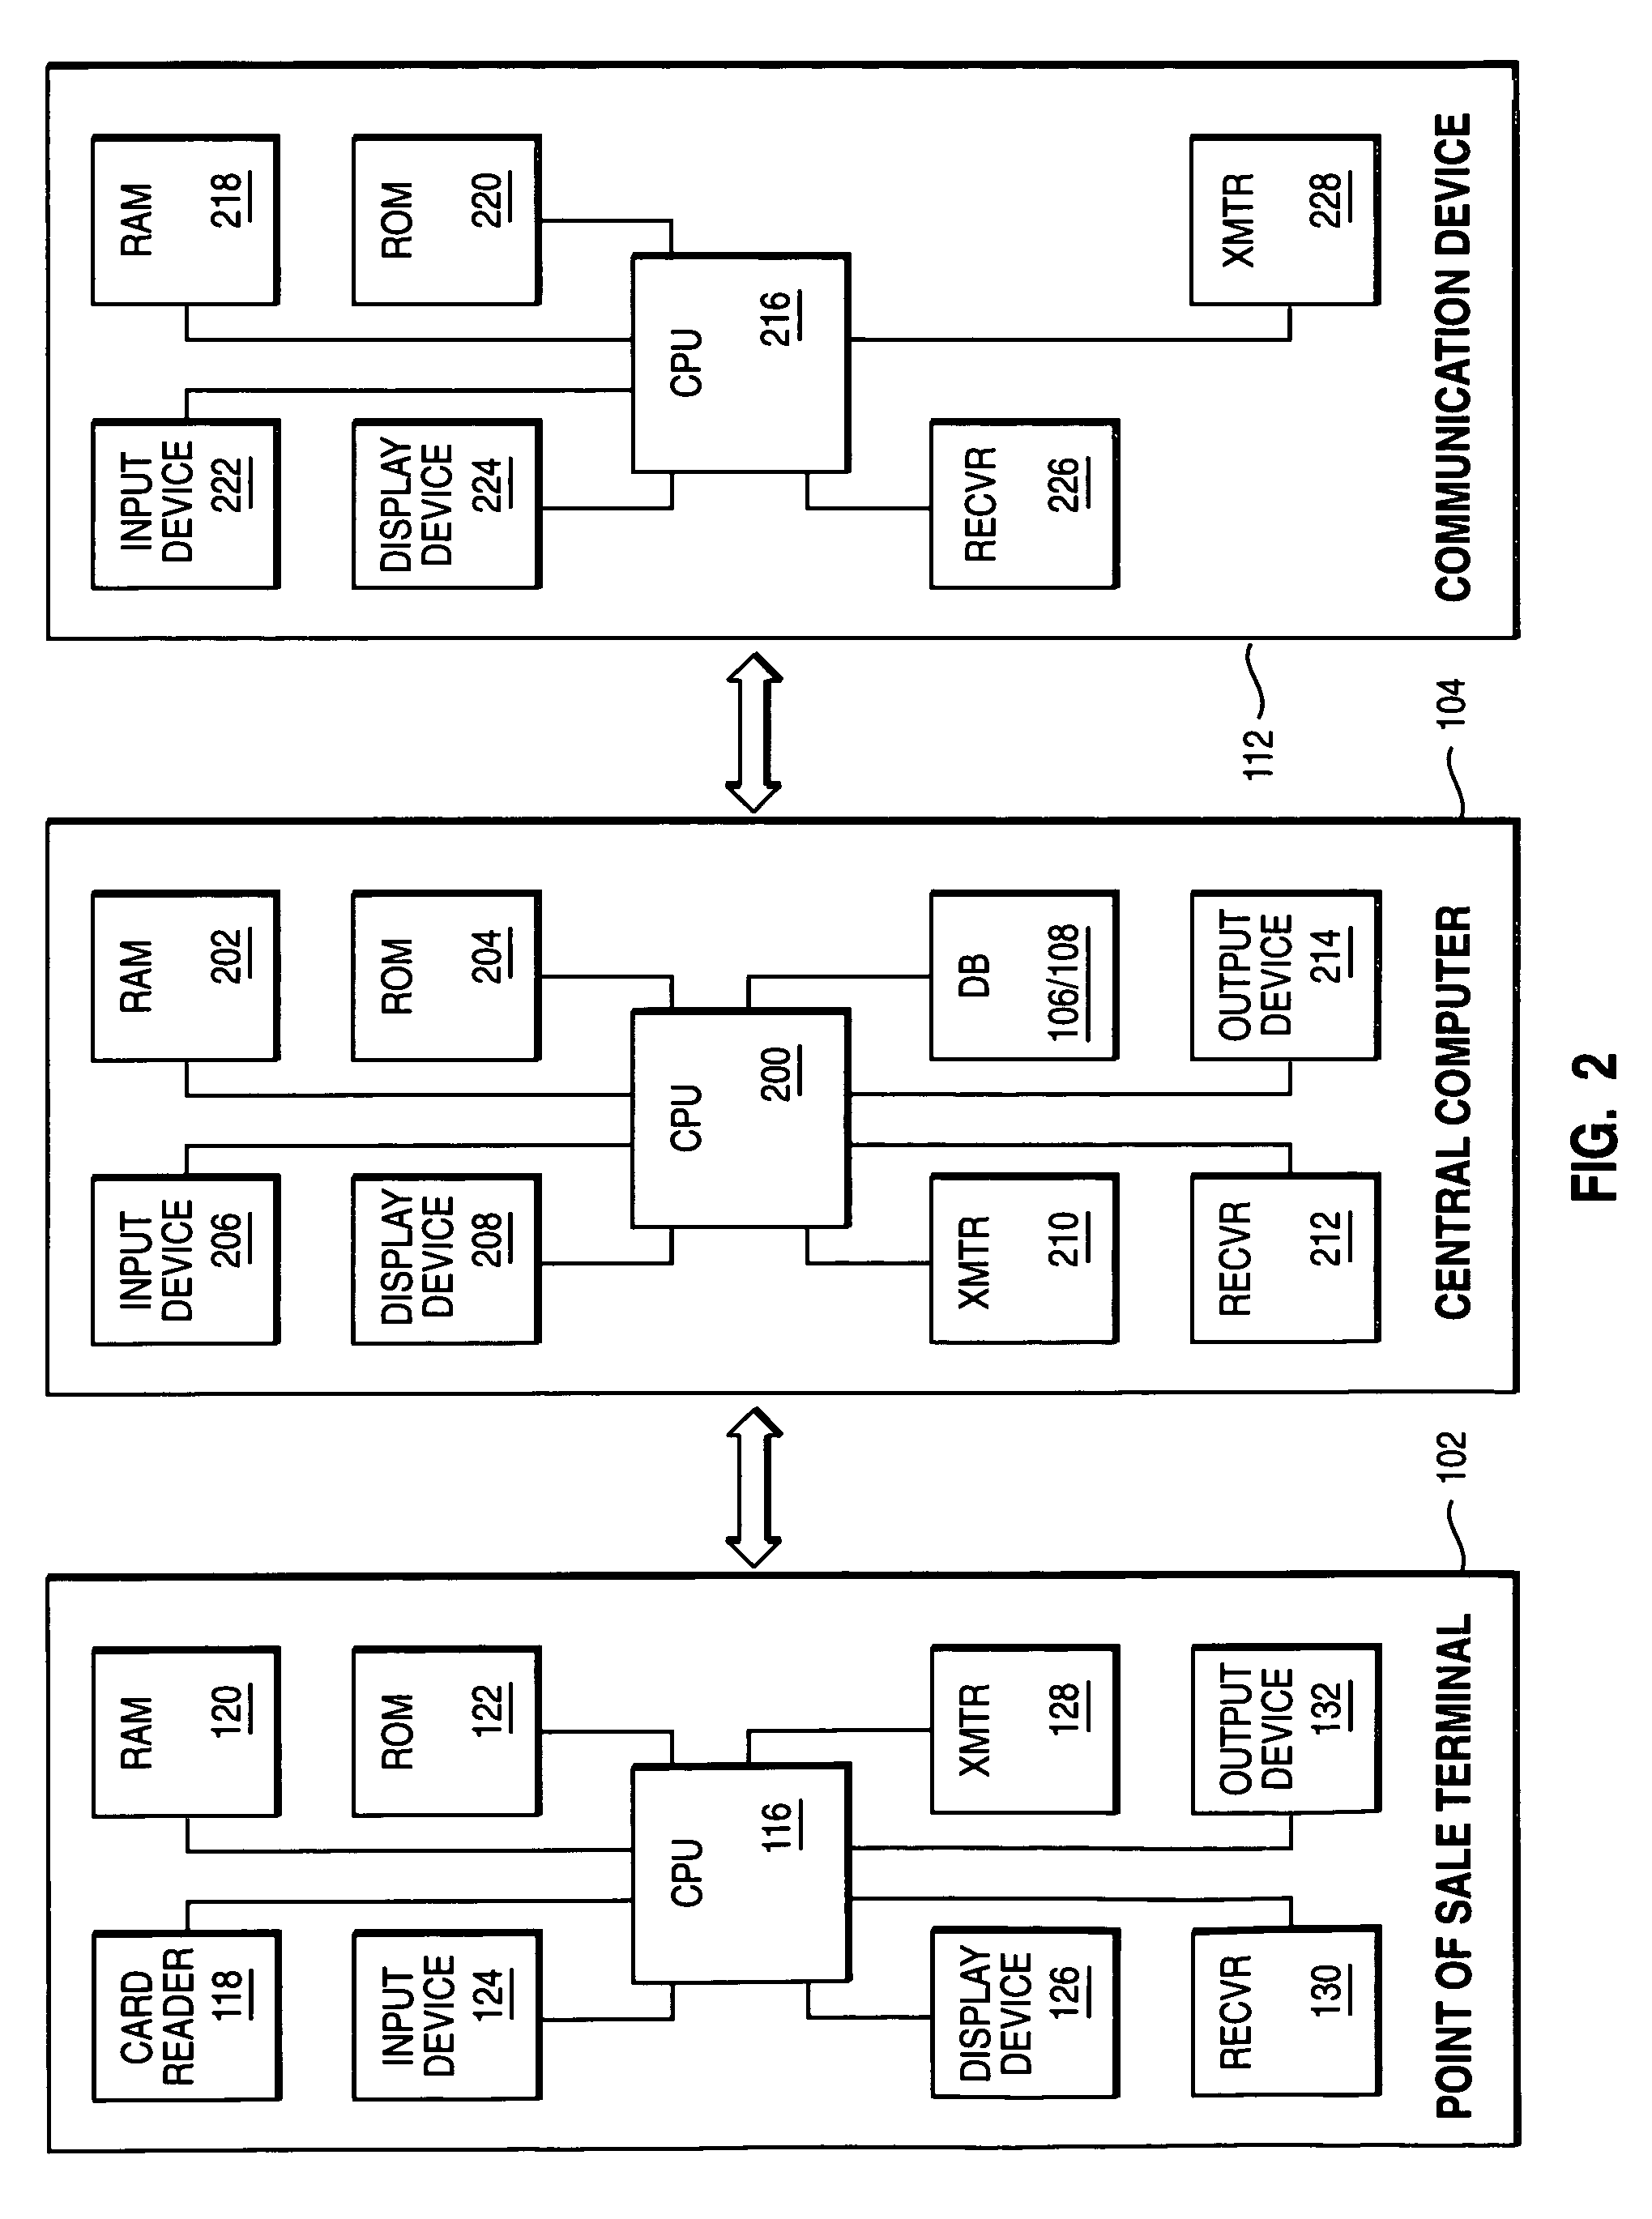 Credit authorization system and method